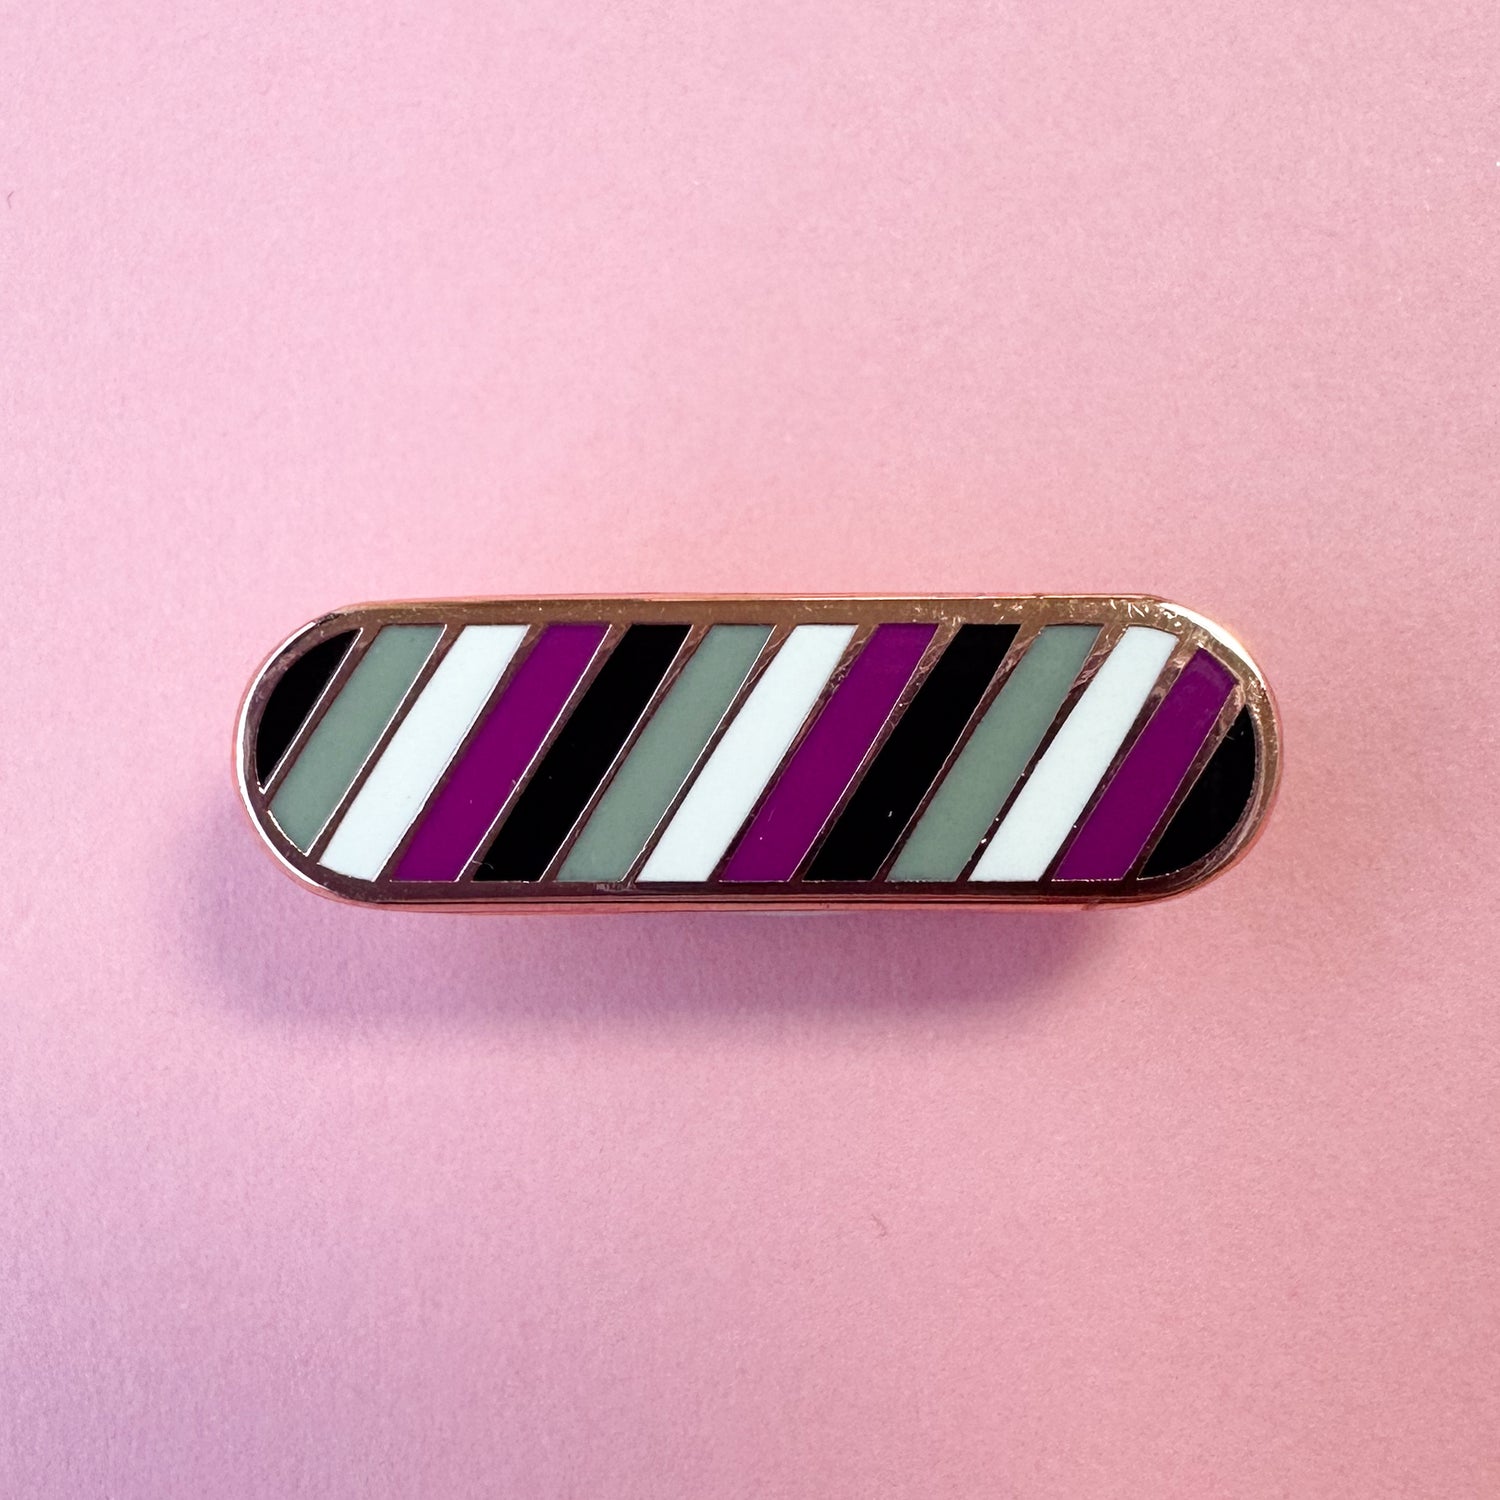 A bandaid shaped pin in the colors of the asexual or ace flag.